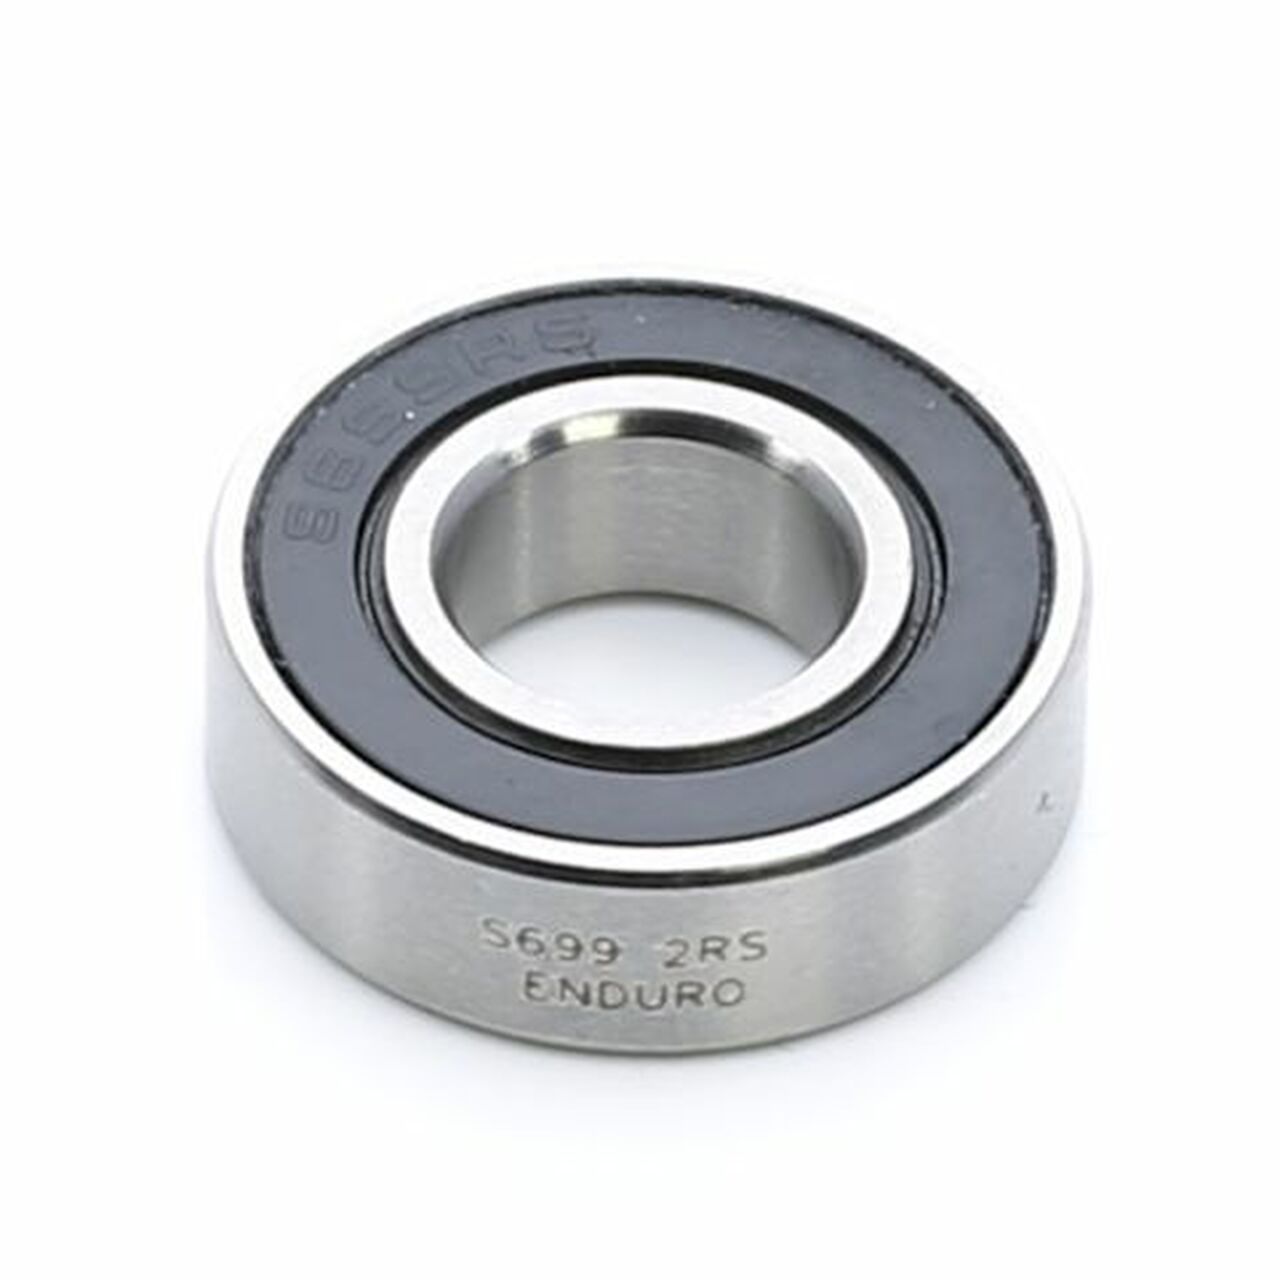 Enduro S699 LLB - Stainless Steel, Radial Bearing (C3 Clearance) - 9mm x 20mm x 6mm